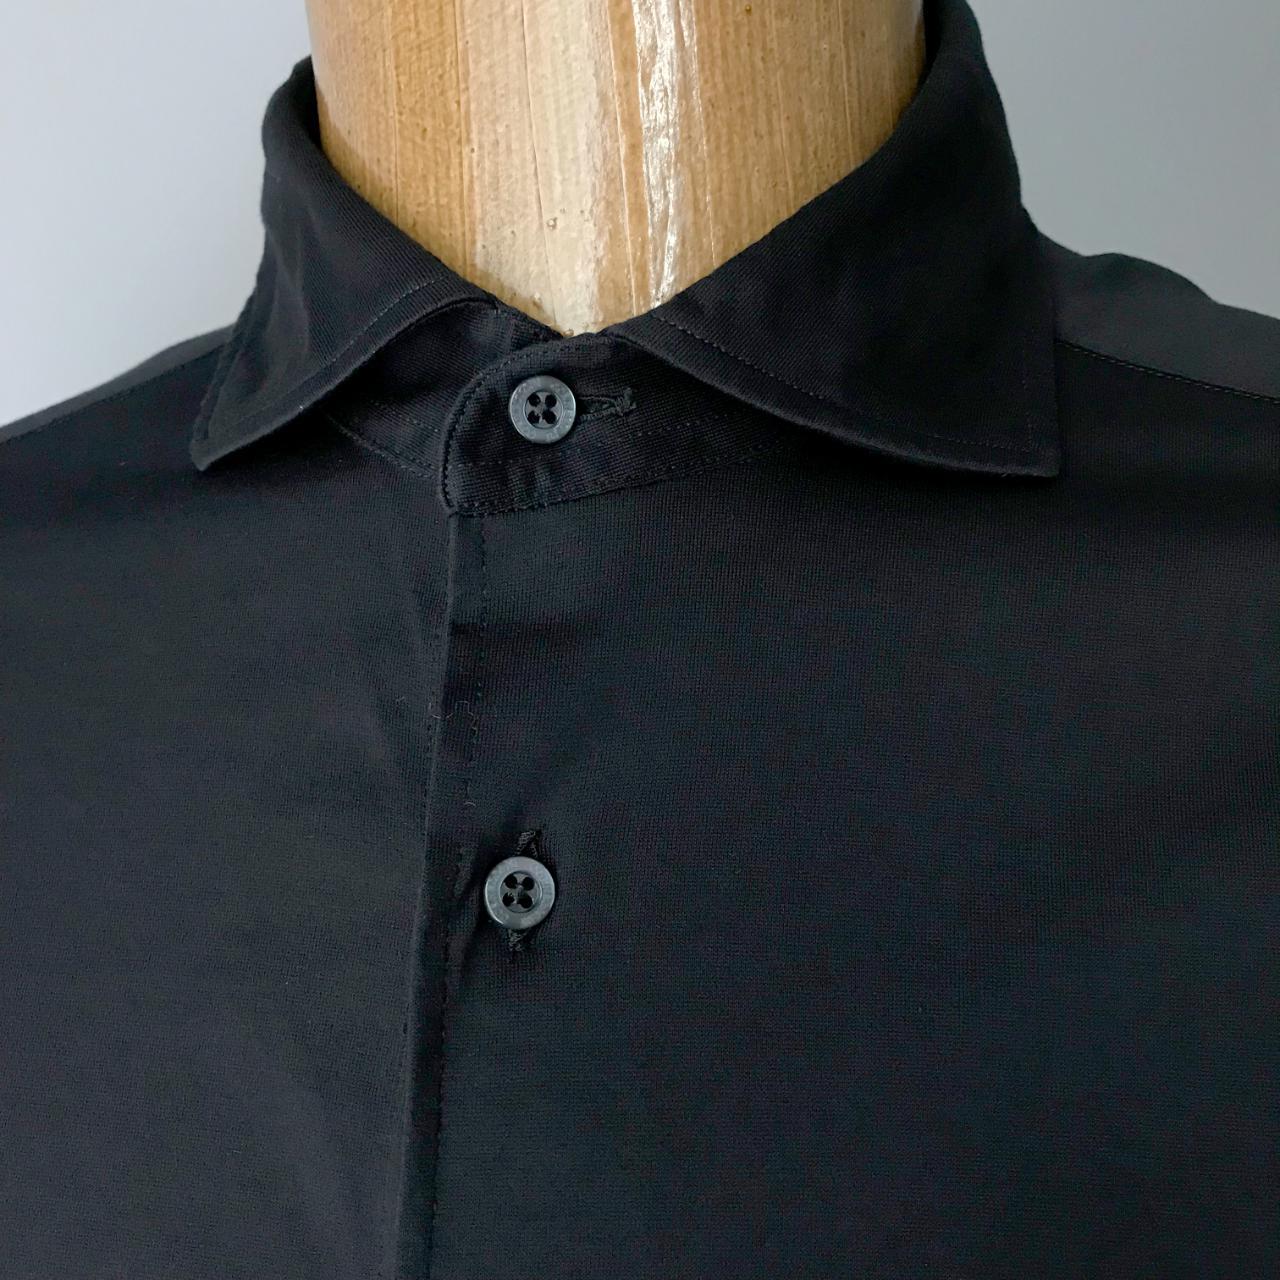 Product Image 2 - Modern black dress shirt with